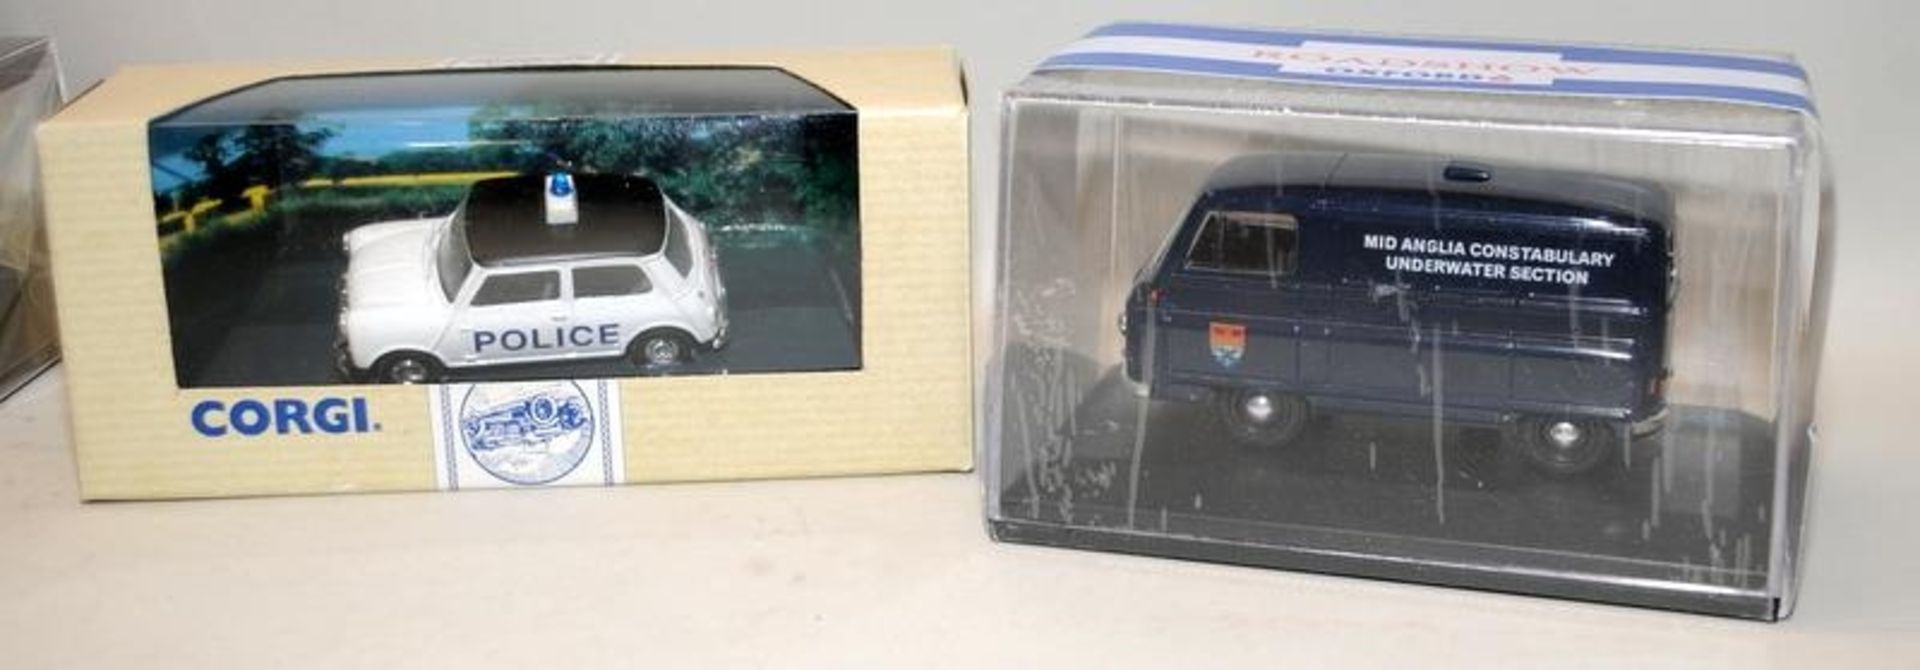 Collection of boxed die-cast models including Tin Tin, Muppets etc. 6 in lot - Image 2 of 4